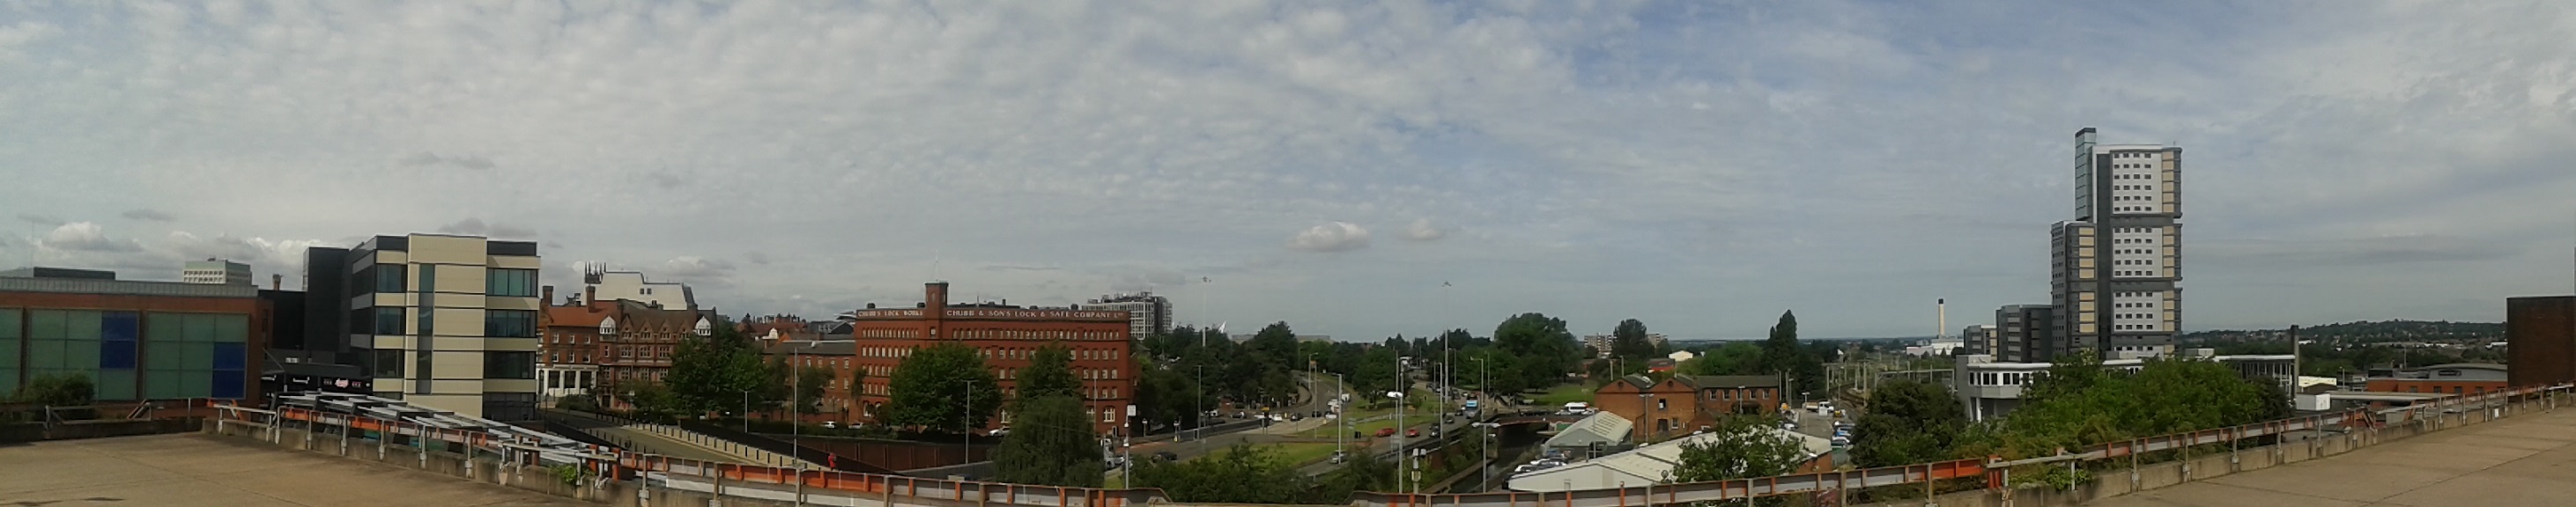 Panorama of the city of Wolverhampton taken from the car park above the train station, showing tall buildings and main roads